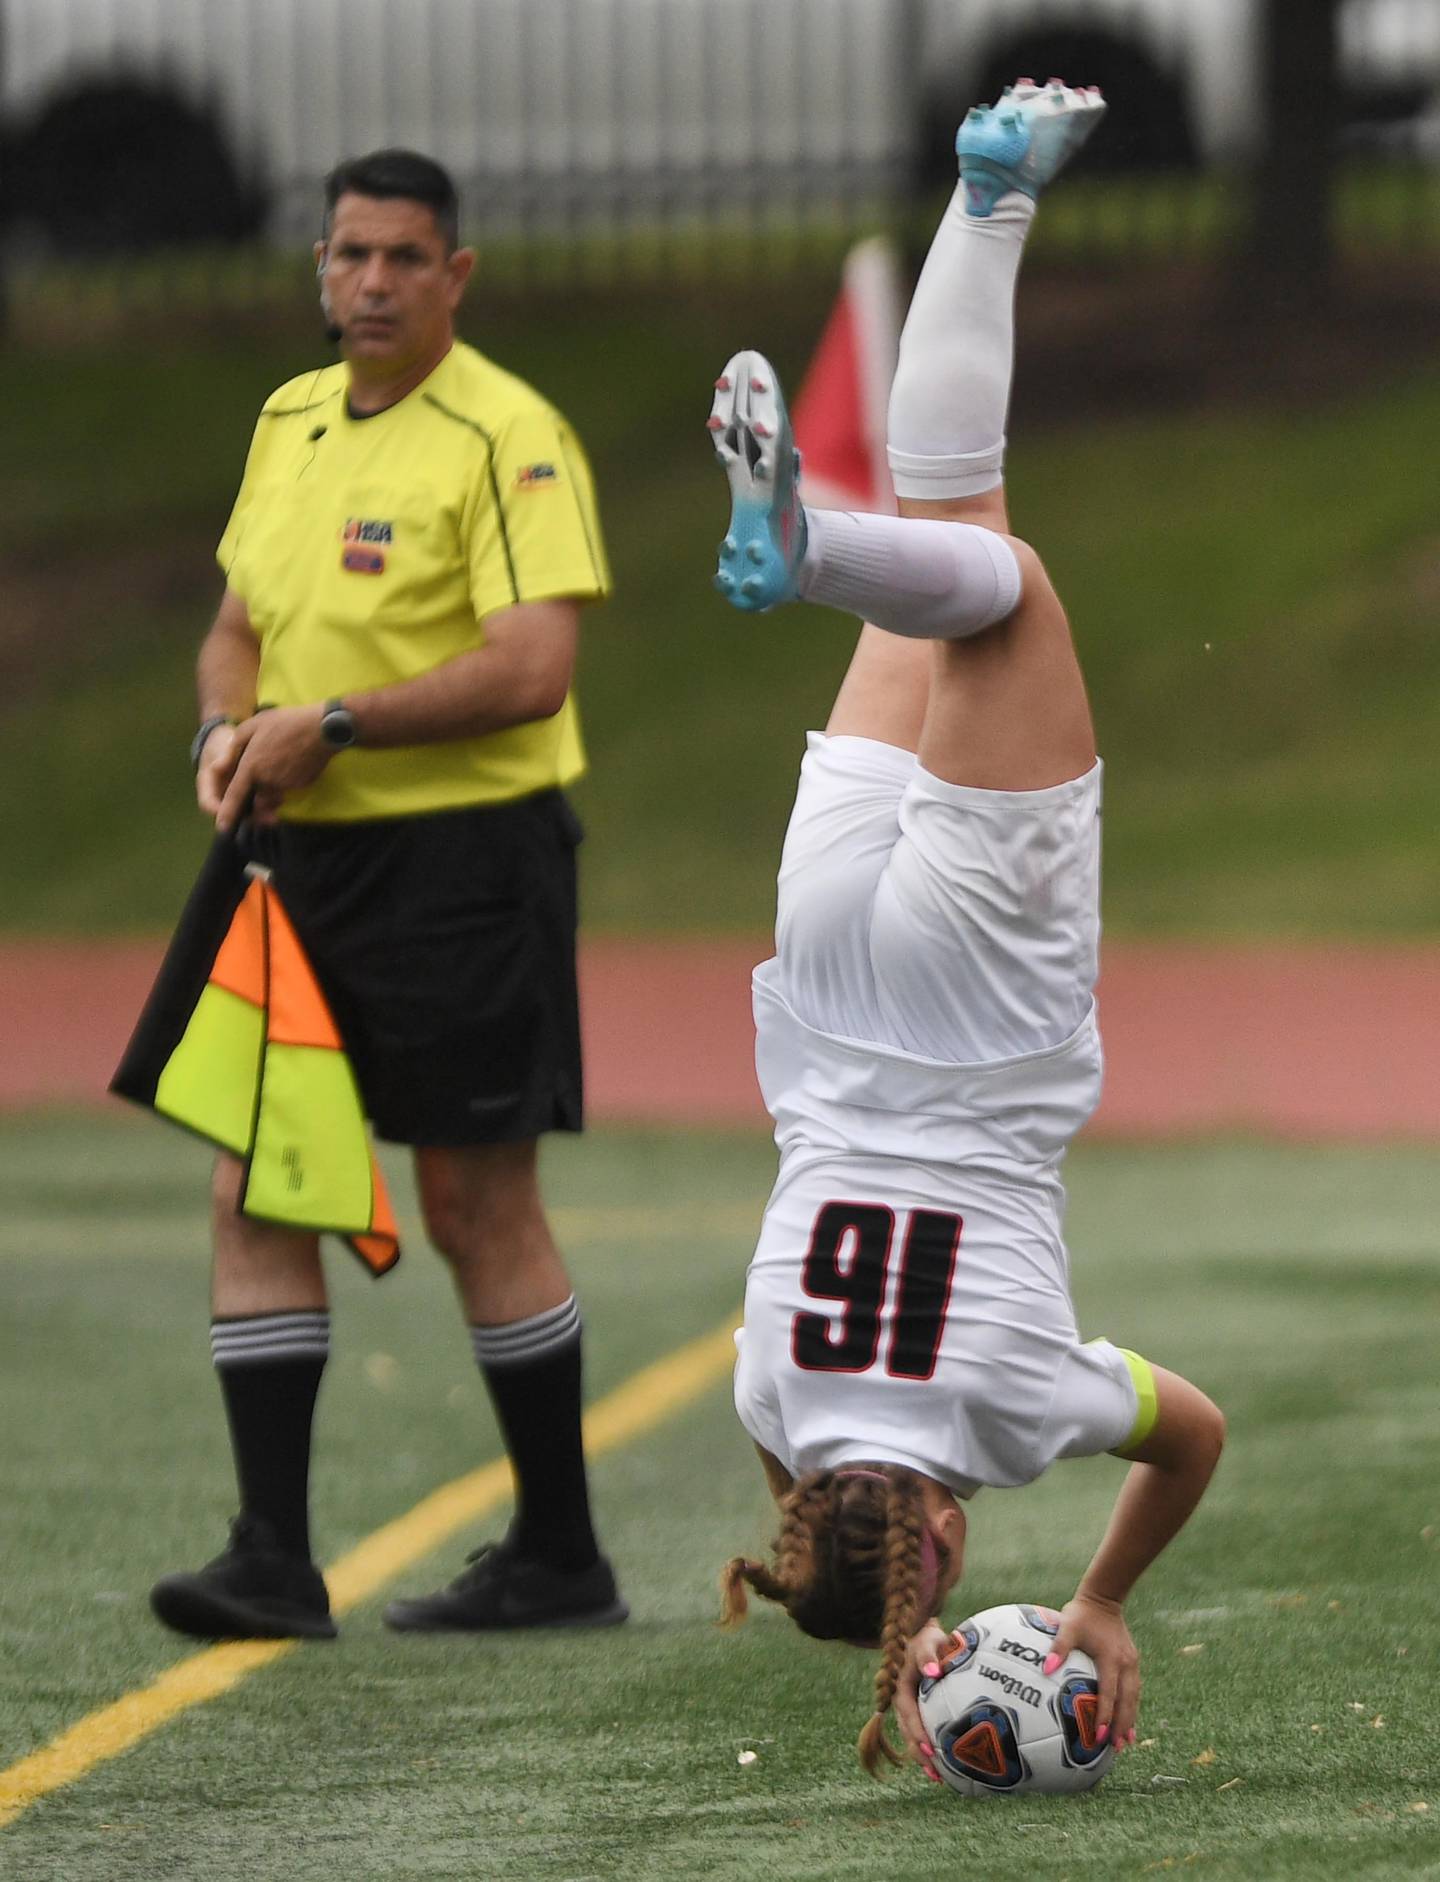 Lincoln-Way Central’s Grace Grundhofer flips on her throw-in against Evanston in the Class 3A IHSA state girls soccer third-place game in Naperville on Saturday, June 4, 2022.